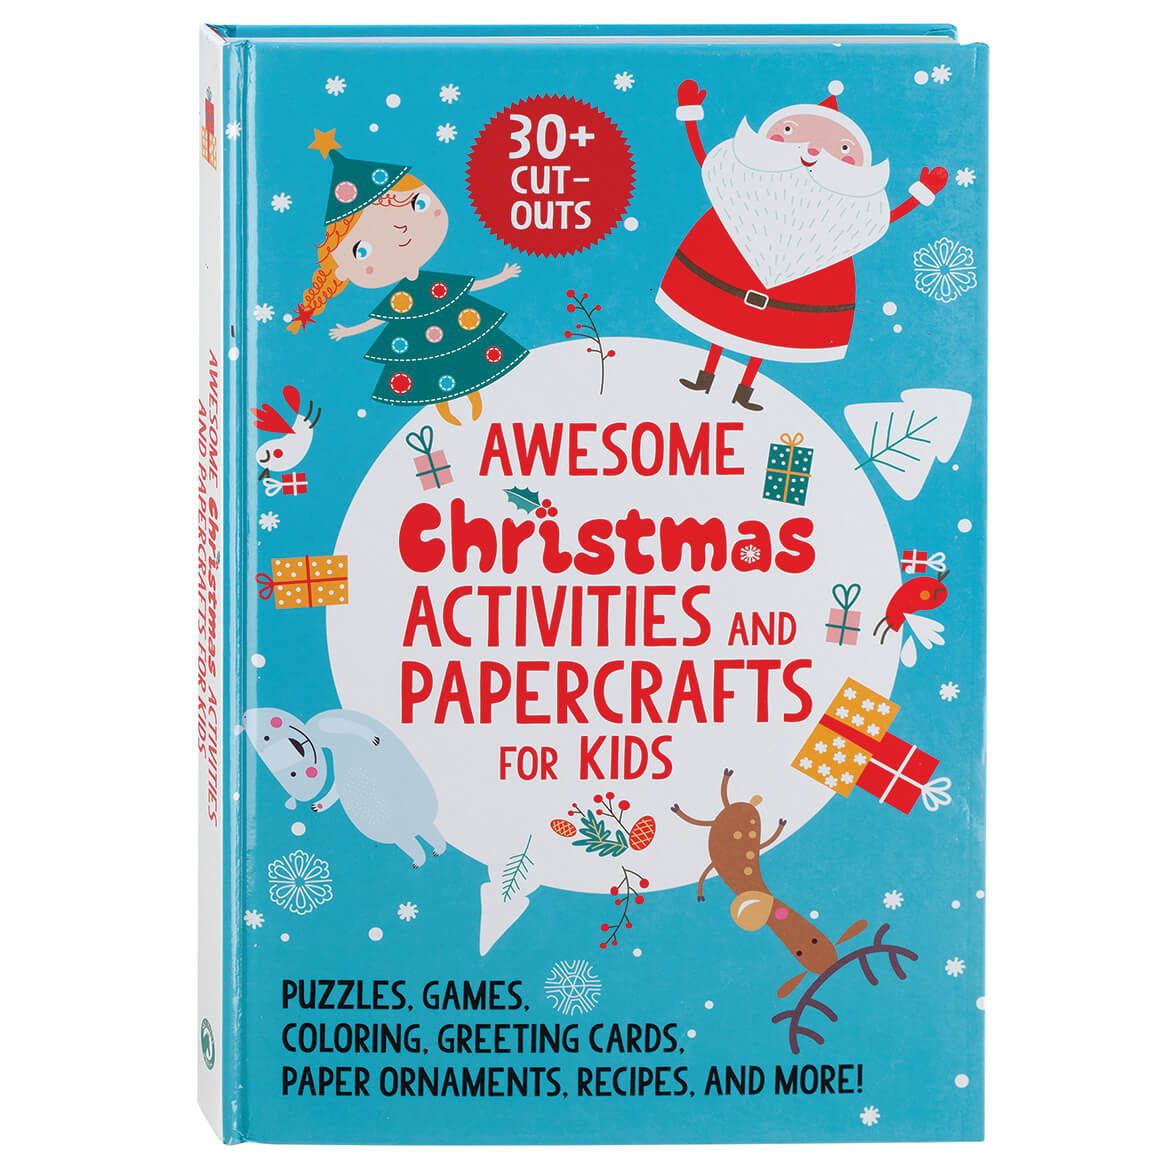 Awesome Christmas Activities and Papercrafts for Kids + '-' + 374096